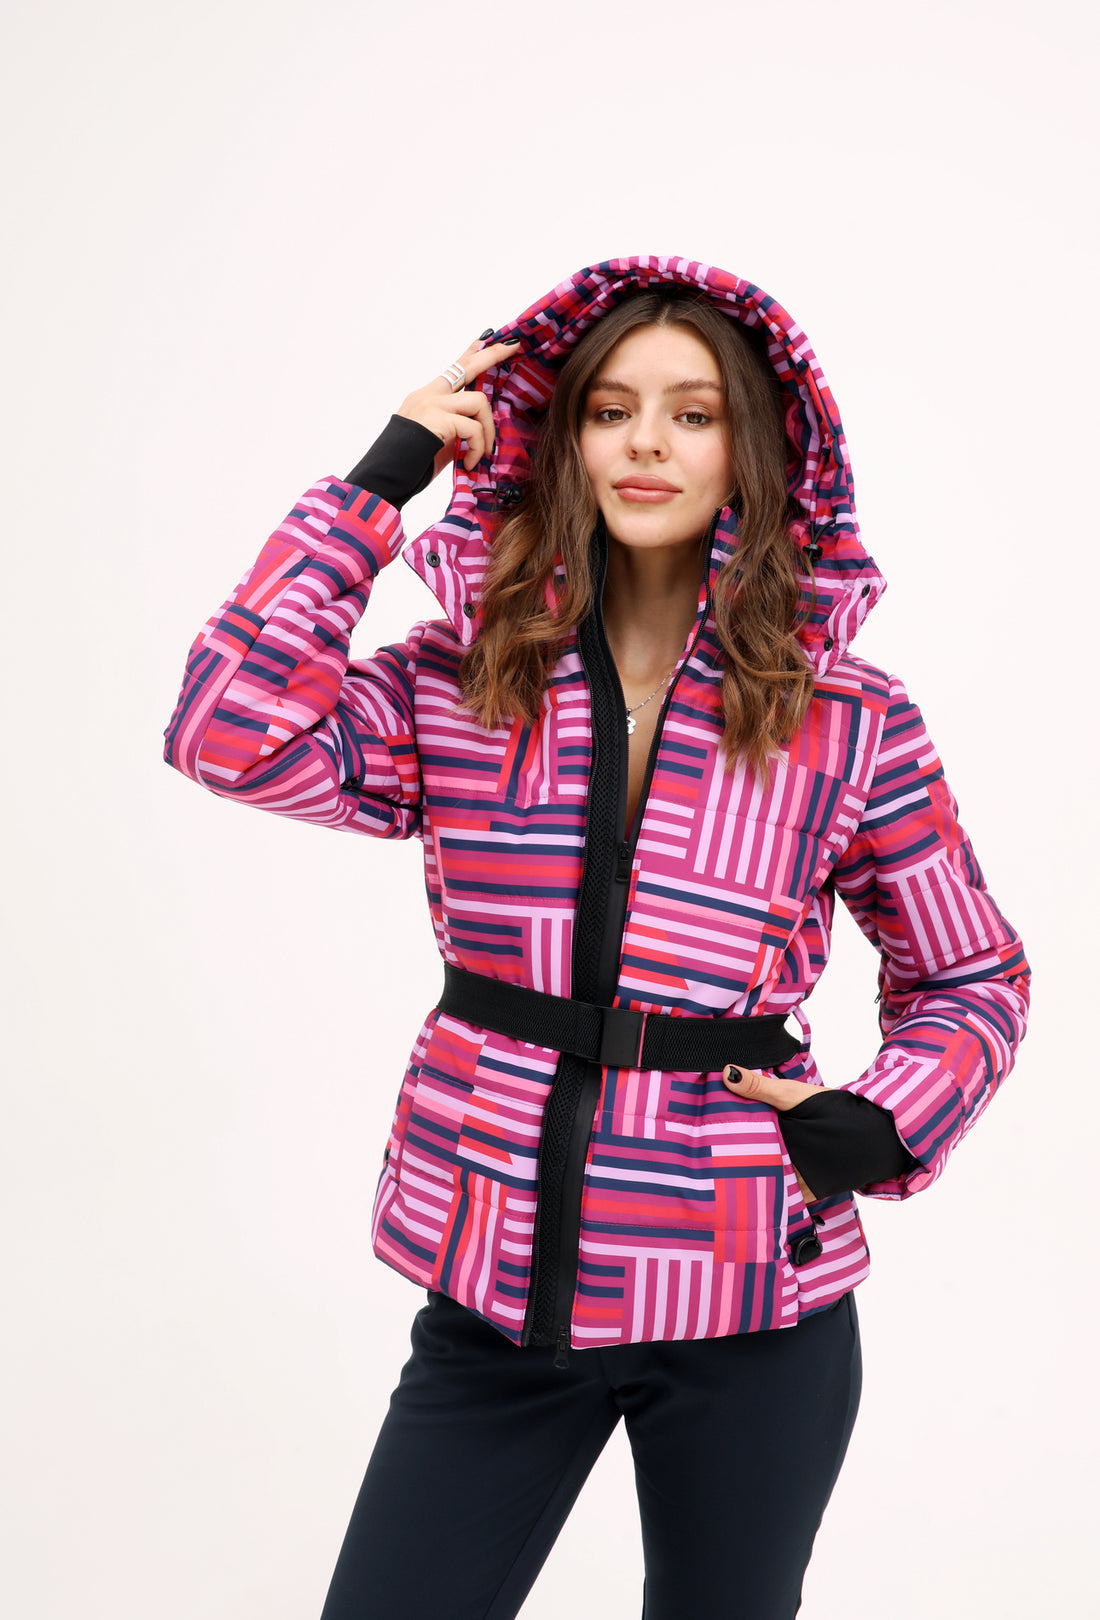 Pink pattern two piece ski outfit - McKinley Pink - Hot pink ski suit